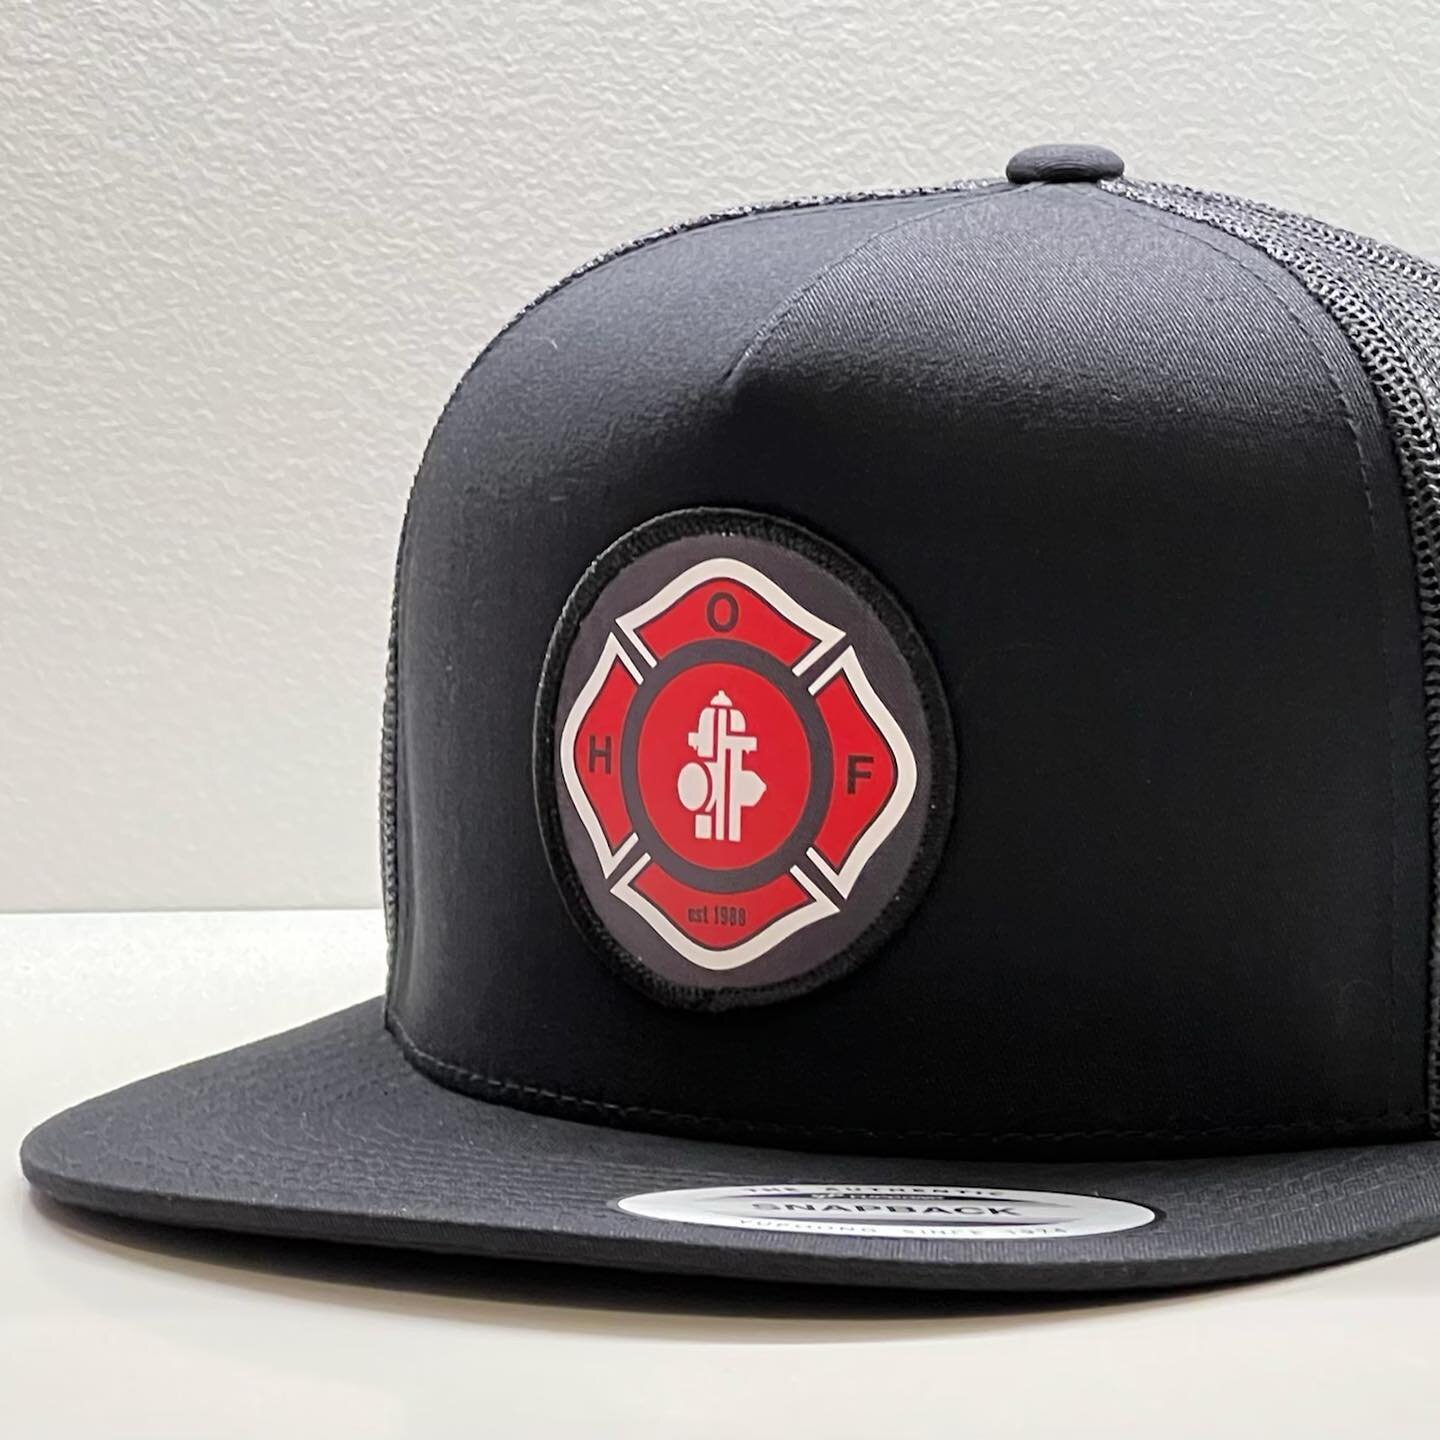 Digitally printed marrowed crests. The cleanedt method for decorating hats with detailed logos.